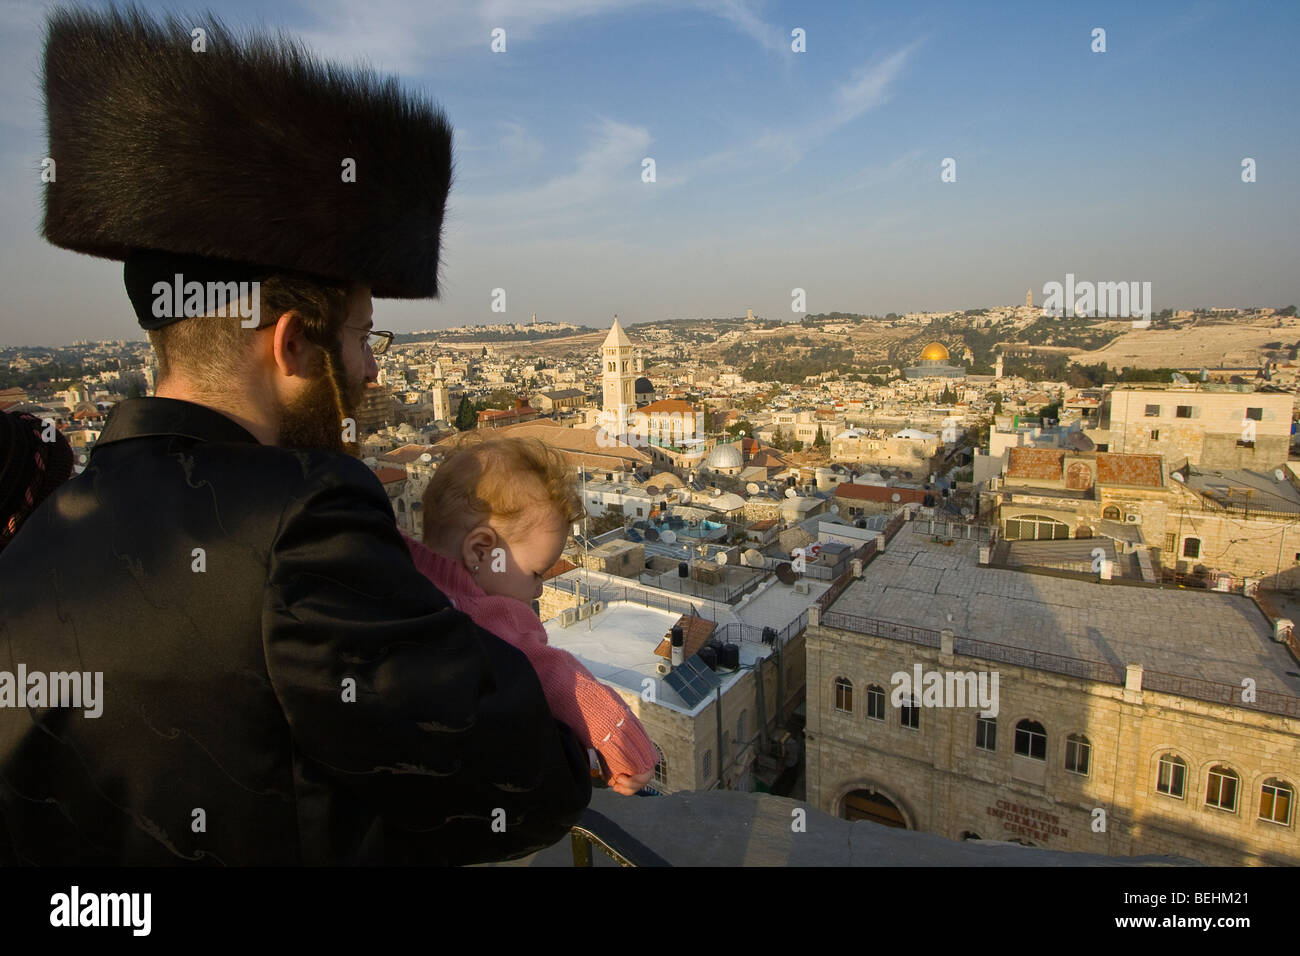 Hasidic Jewish Man and Baby looking at the Dome on the Rock in the Old City of Jerusalem Stock Photo